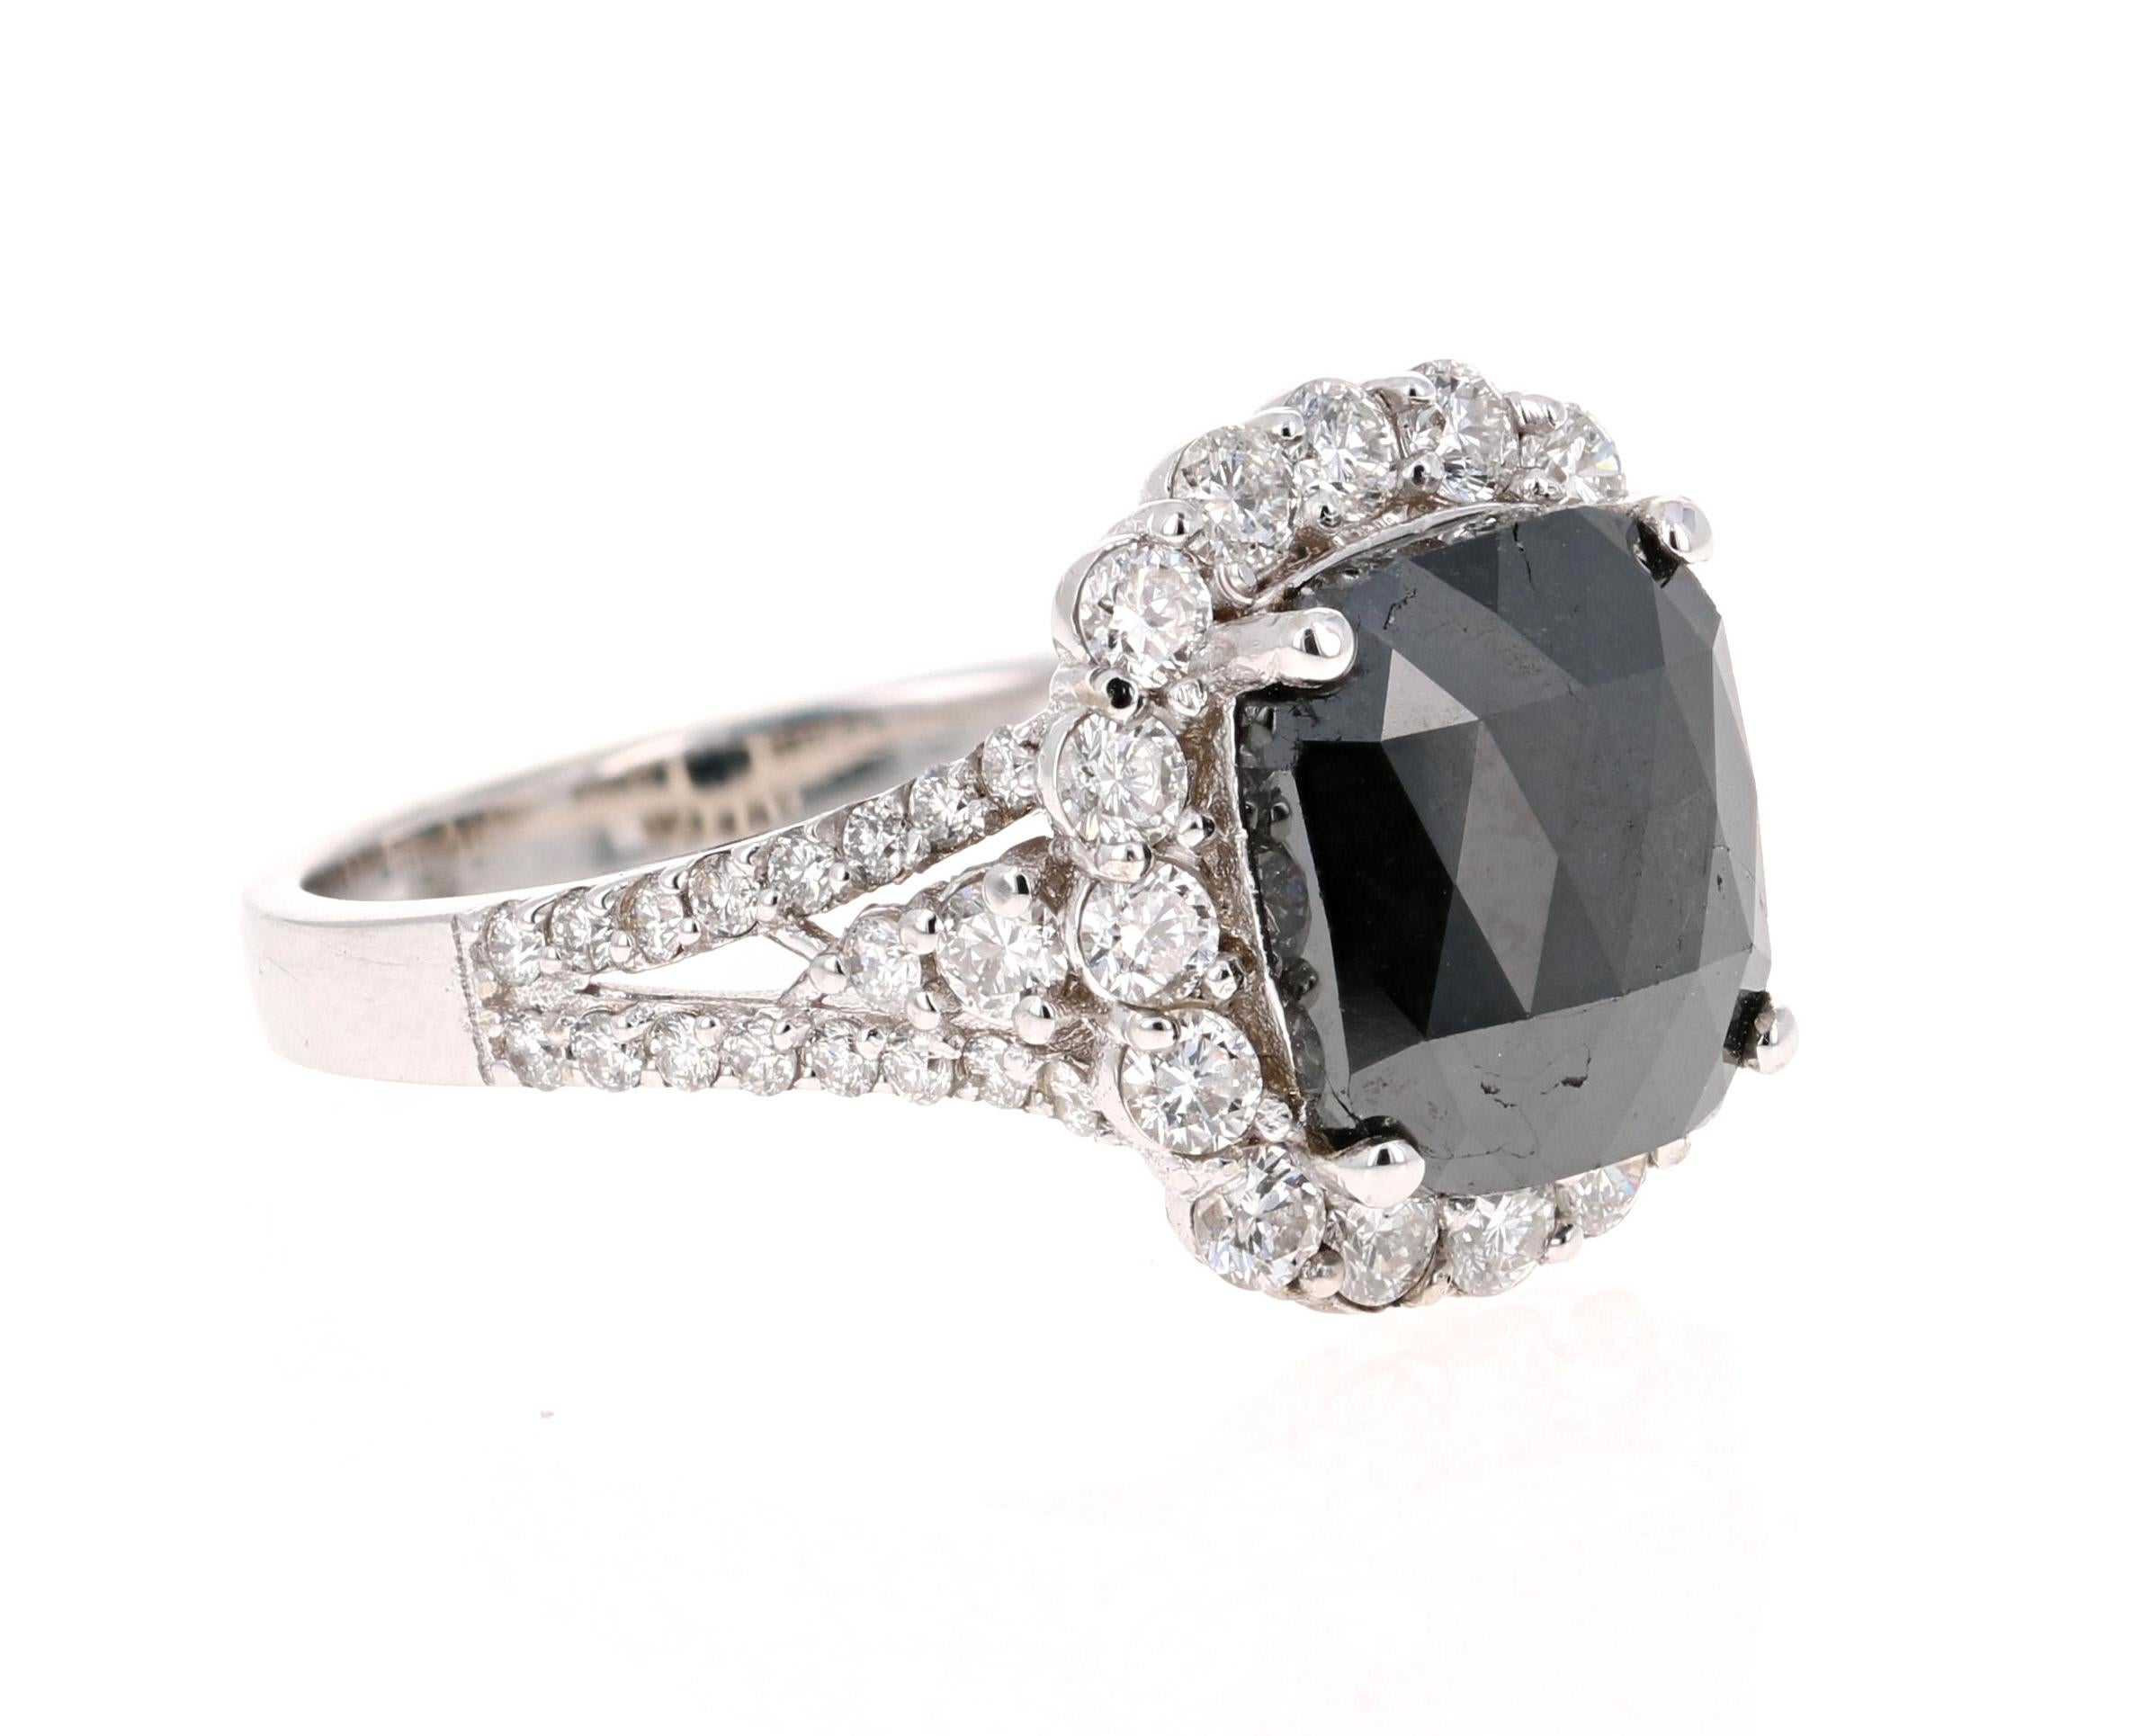 Stunning Black and White Diamond Cocktail or Engagement Ring that is a nothing but a Statement! 

The Rectangular Cushion Cut Black Diamond is 3.17 Carats and is surrounded by 52 Round Cut Diamonds weighing 1.15 Carats. (Clarity: SI, Color: F) The